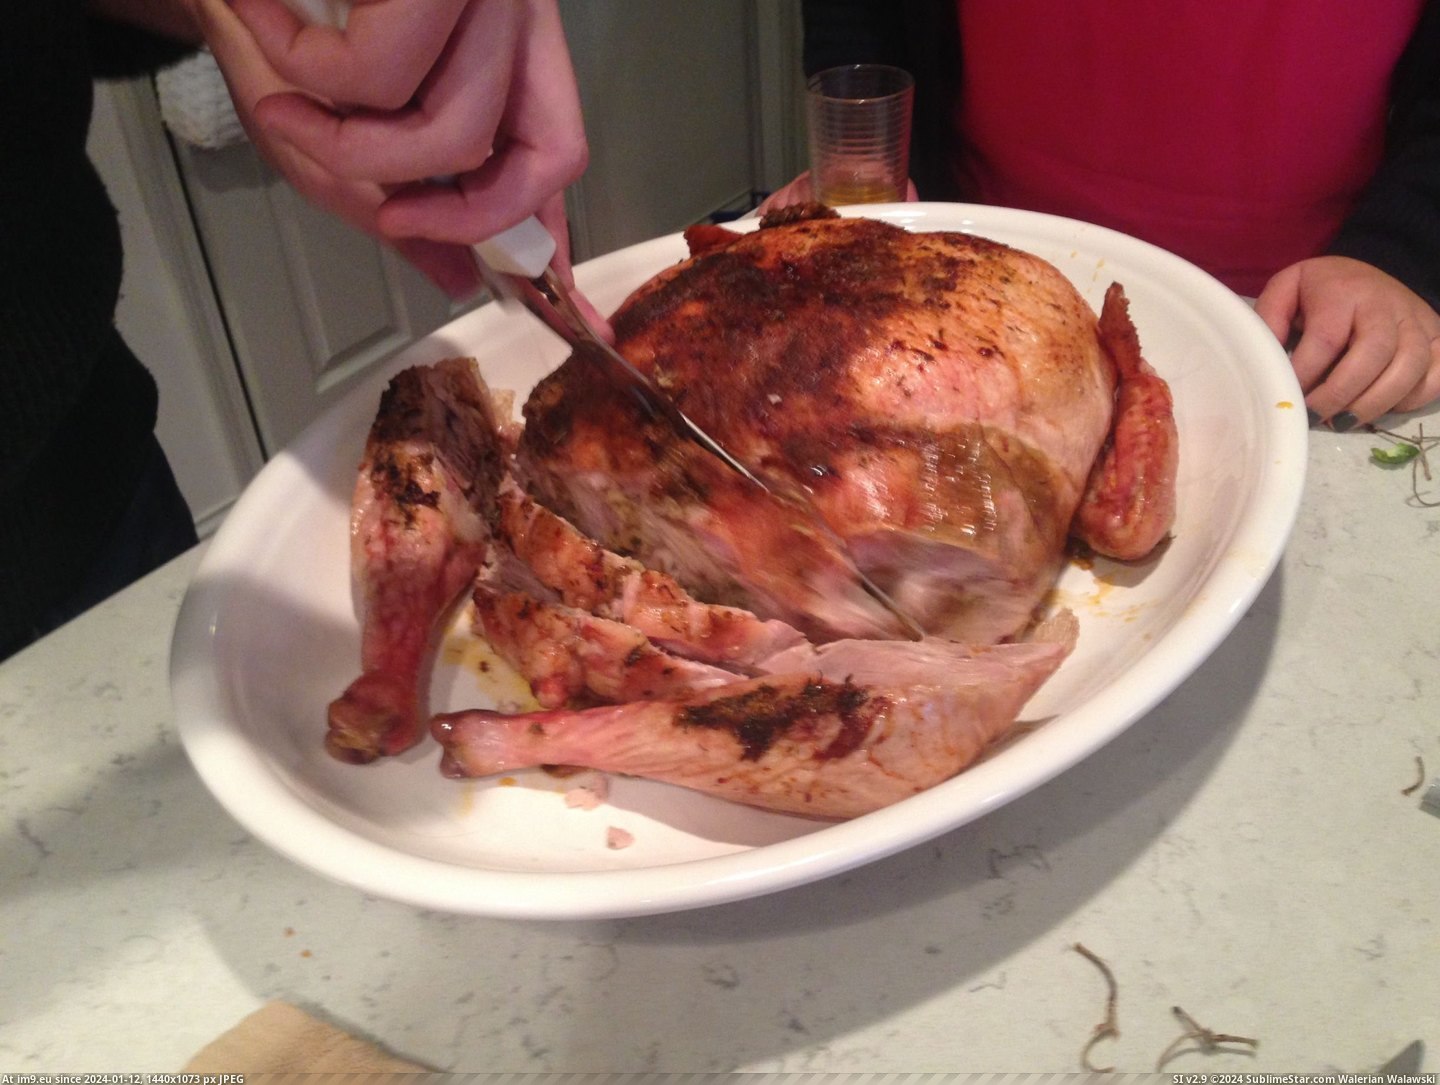 #For #Year #Thought #Thanksgiving #Duck #Turkey #Turducken #Family #See #Chicken [Pics] My family makes turducken (a chicken in a duck in a turkey) every year for Thanksgiving. Thought reddit would like to see Pic. (Obraz z album My r/PICS favs))